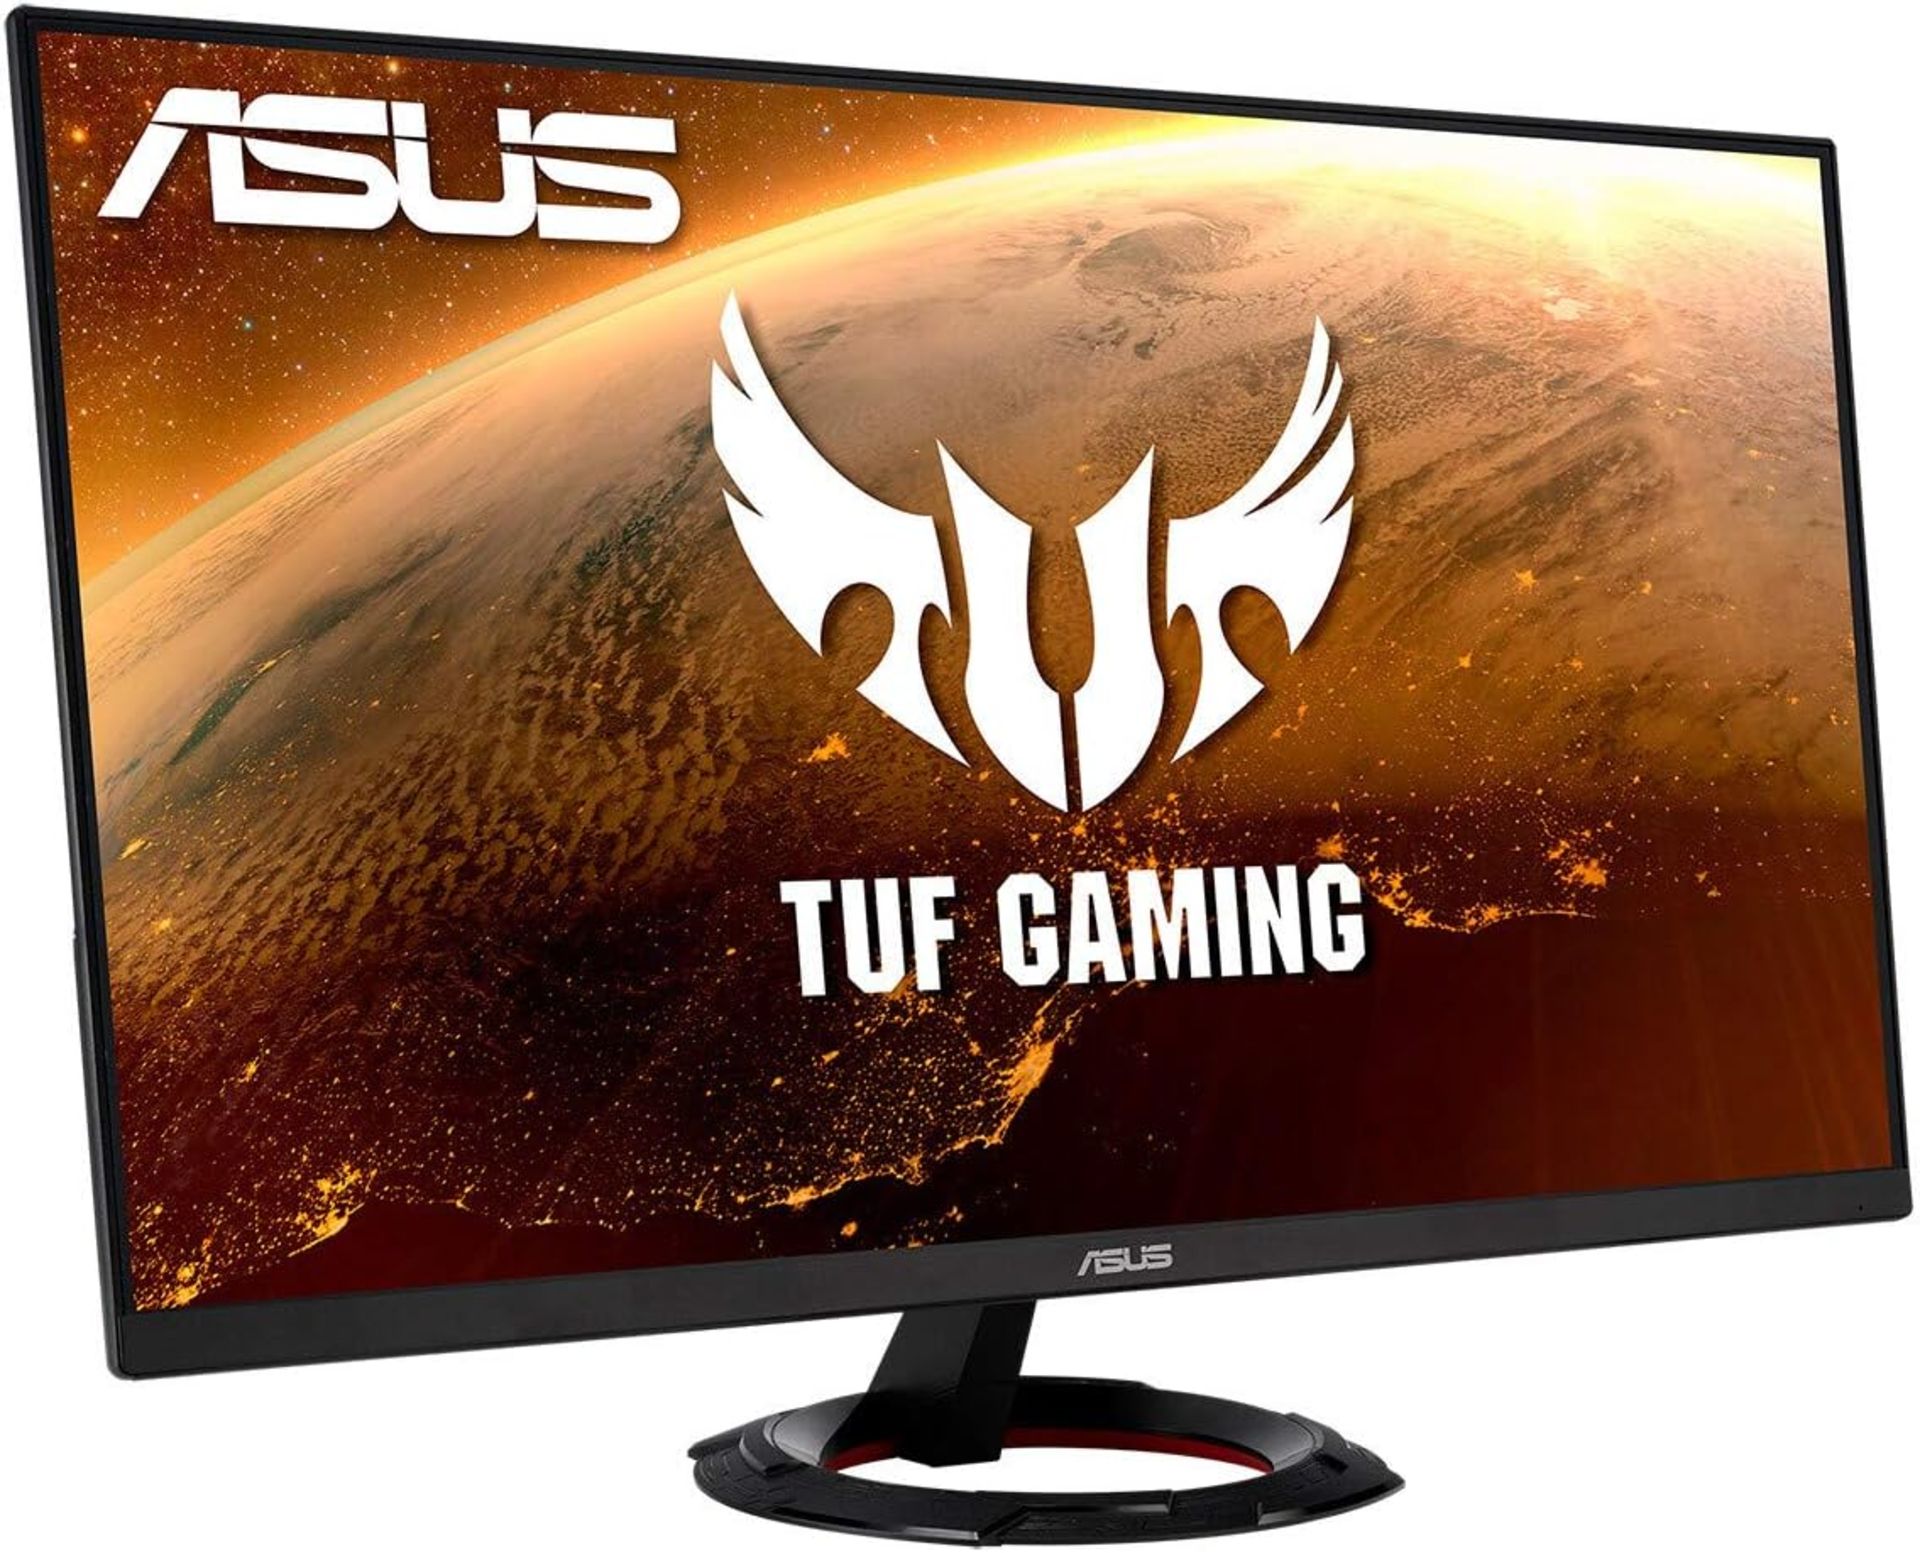 BRAND NEW FACTORY SEALED ASUS TUF VG279Q1R 27 Inch 144hz Gaming Monitor. RRP £249. (PCKBW). 27-